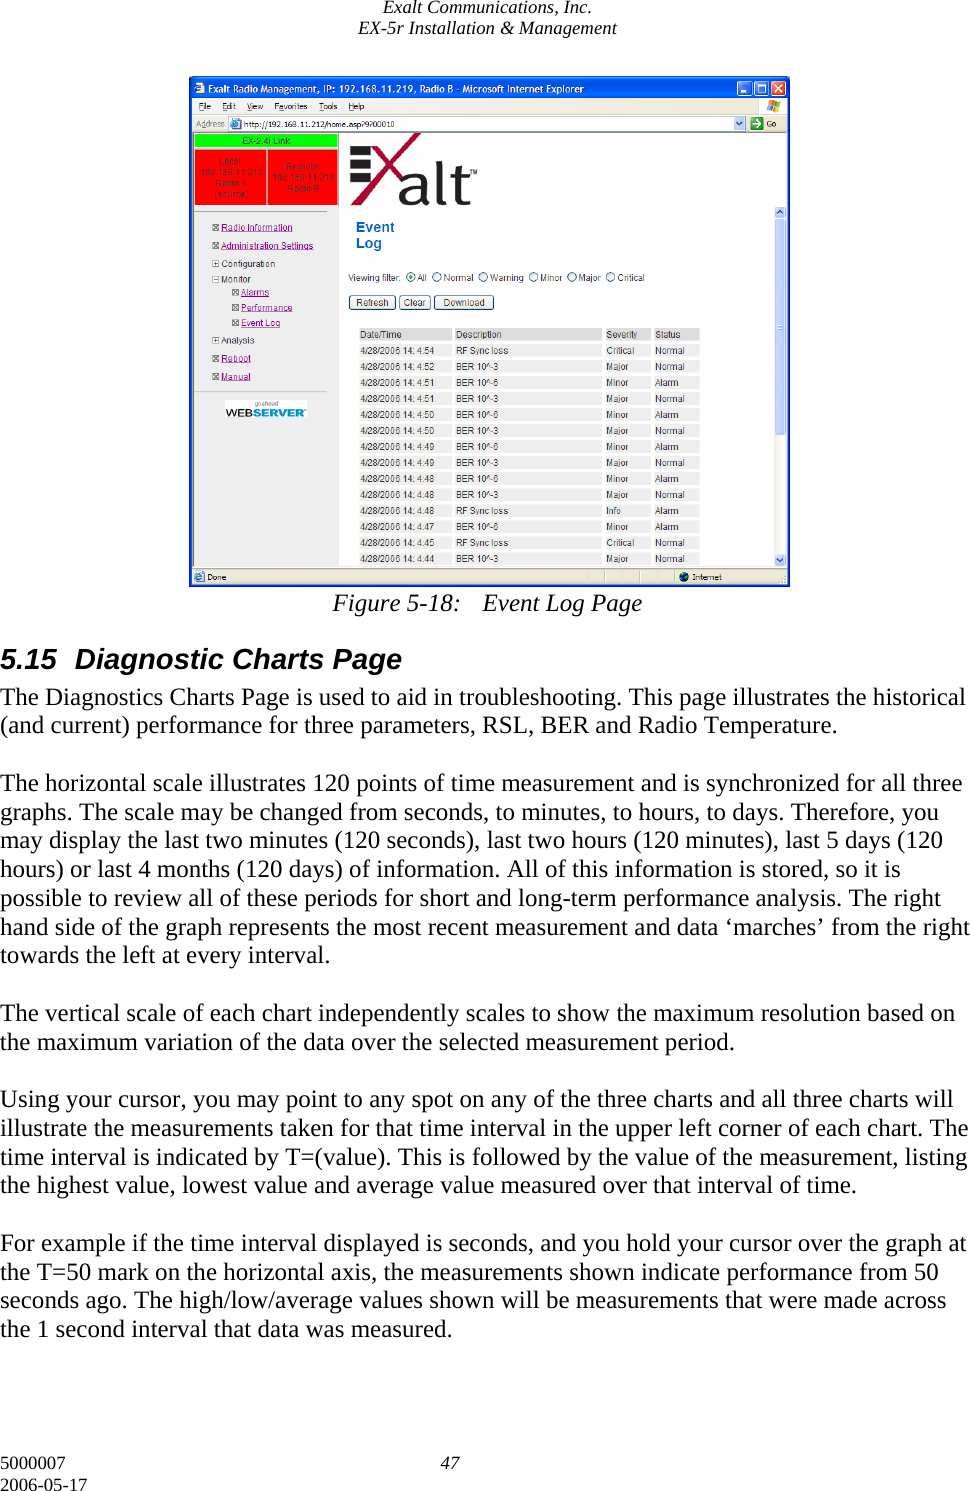 Exalt Communications, Inc. EX-5r Installation &amp; Management 5000007  47 2006-05-17                   Figure 5-18:  Event Log Page 5.15  Diagnostic Charts Page The Diagnostics Charts Page is used to aid in troubleshooting. This page illustrates the historical (and current) performance for three parameters, RSL, BER and Radio Temperature.  The horizontal scale illustrates 120 points of time measurement and is synchronized for all three graphs. The scale may be changed from seconds, to minutes, to hours, to days. Therefore, you may display the last two minutes (120 seconds), last two hours (120 minutes), last 5 days (120 hours) or last 4 months (120 days) of information. All of this information is stored, so it is possible to review all of these periods for short and long-term performance analysis. The right hand side of the graph represents the most recent measurement and data ‘marches’ from the right towards the left at every interval.  The vertical scale of each chart independently scales to show the maximum resolution based on the maximum variation of the data over the selected measurement period.   Using your cursor, you may point to any spot on any of the three charts and all three charts will illustrate the measurements taken for that time interval in the upper left corner of each chart. The time interval is indicated by T=(value). This is followed by the value of the measurement, listing the highest value, lowest value and average value measured over that interval of time.  For example if the time interval displayed is seconds, and you hold your cursor over the graph at the T=50 mark on the horizontal axis, the measurements shown indicate performance from 50 seconds ago. The high/low/average values shown will be measurements that were made across the 1 second interval that data was measured.  